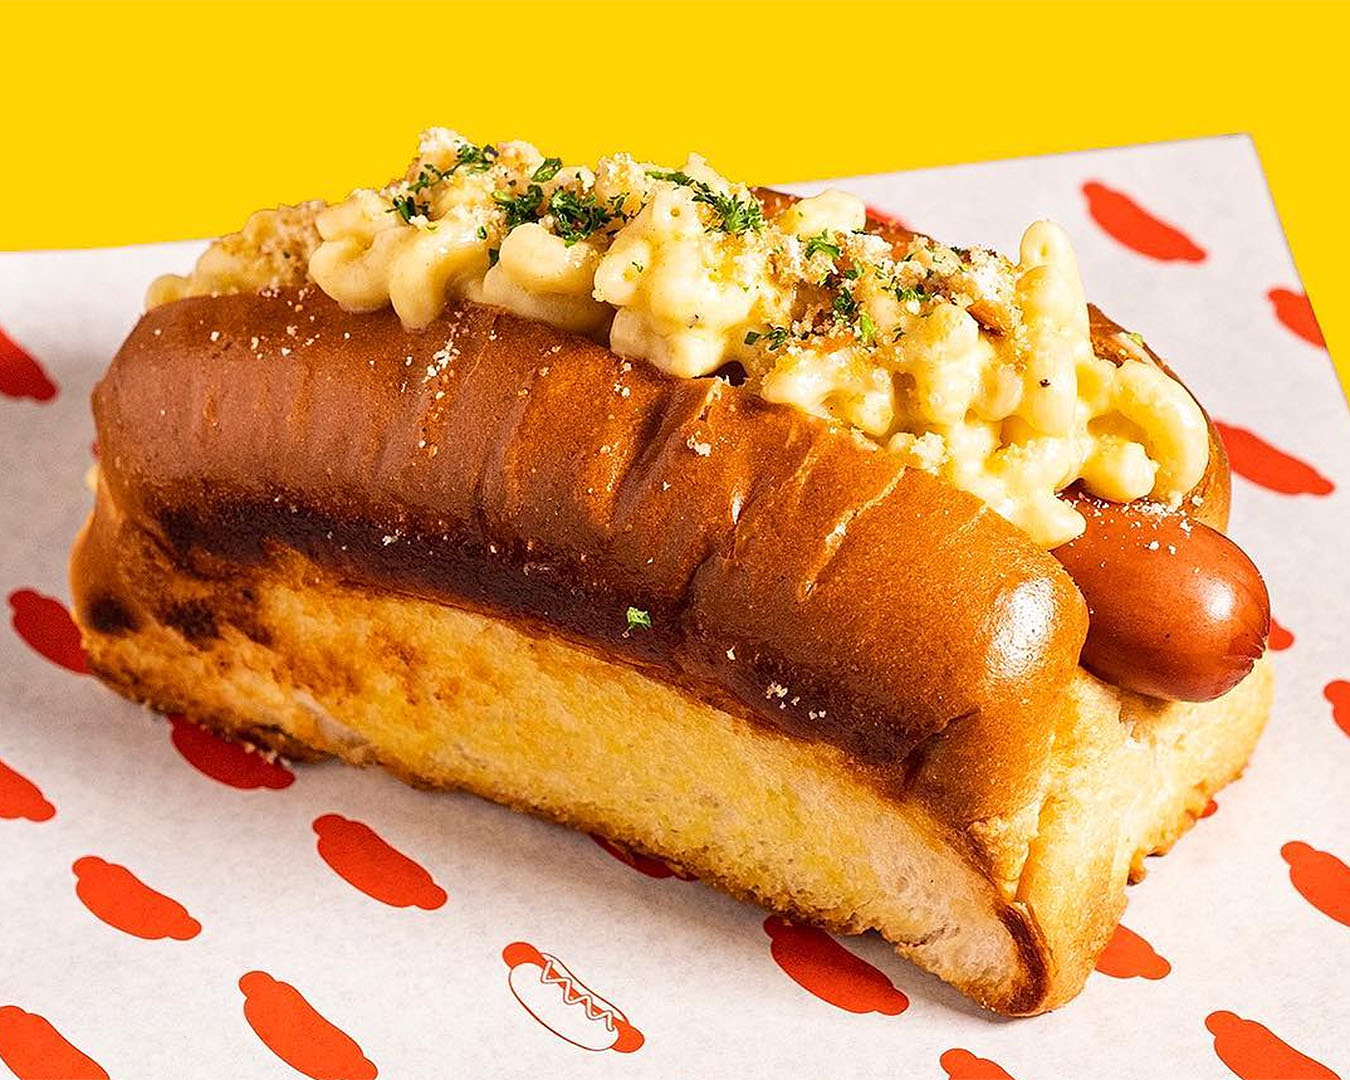 A mac 'n' cheese hot dog from GOOD DOG BAD DOG sits on a plate looking delicious.